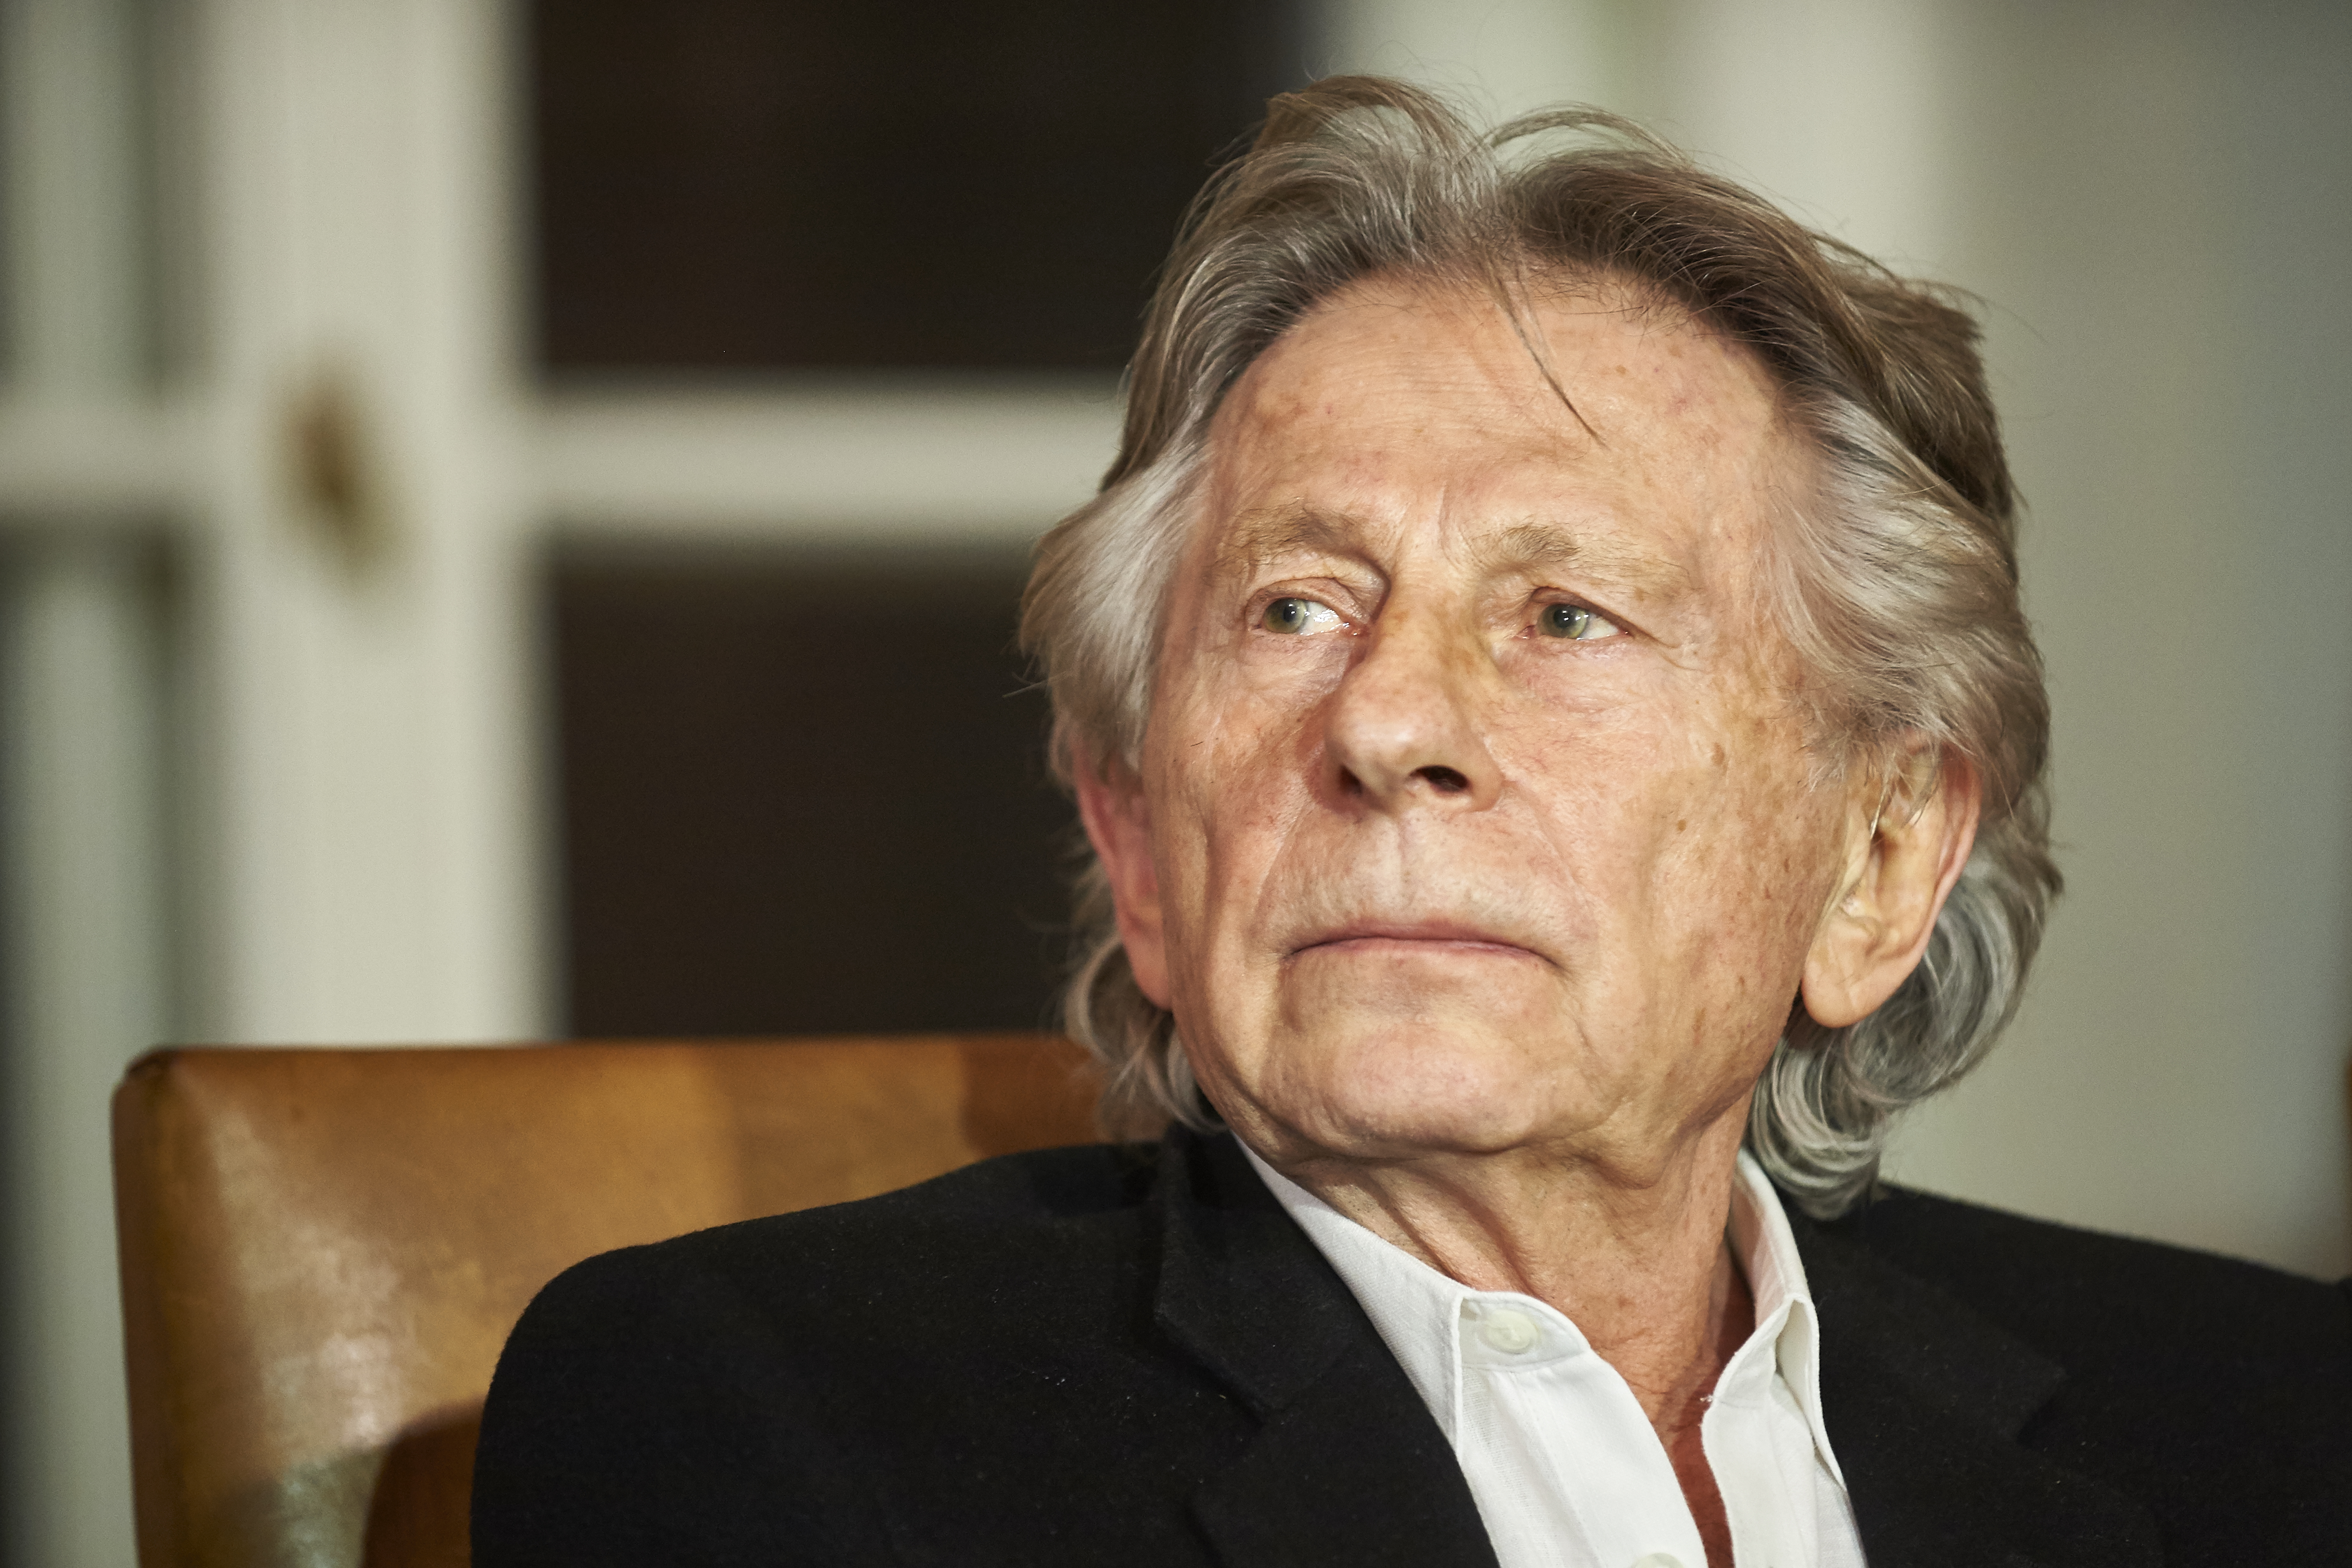 Roman Polanski during a press conference at the Bonarowski Palace Hotel on October 30, 2015 in Krakow, Poland. | Source: Getty Images